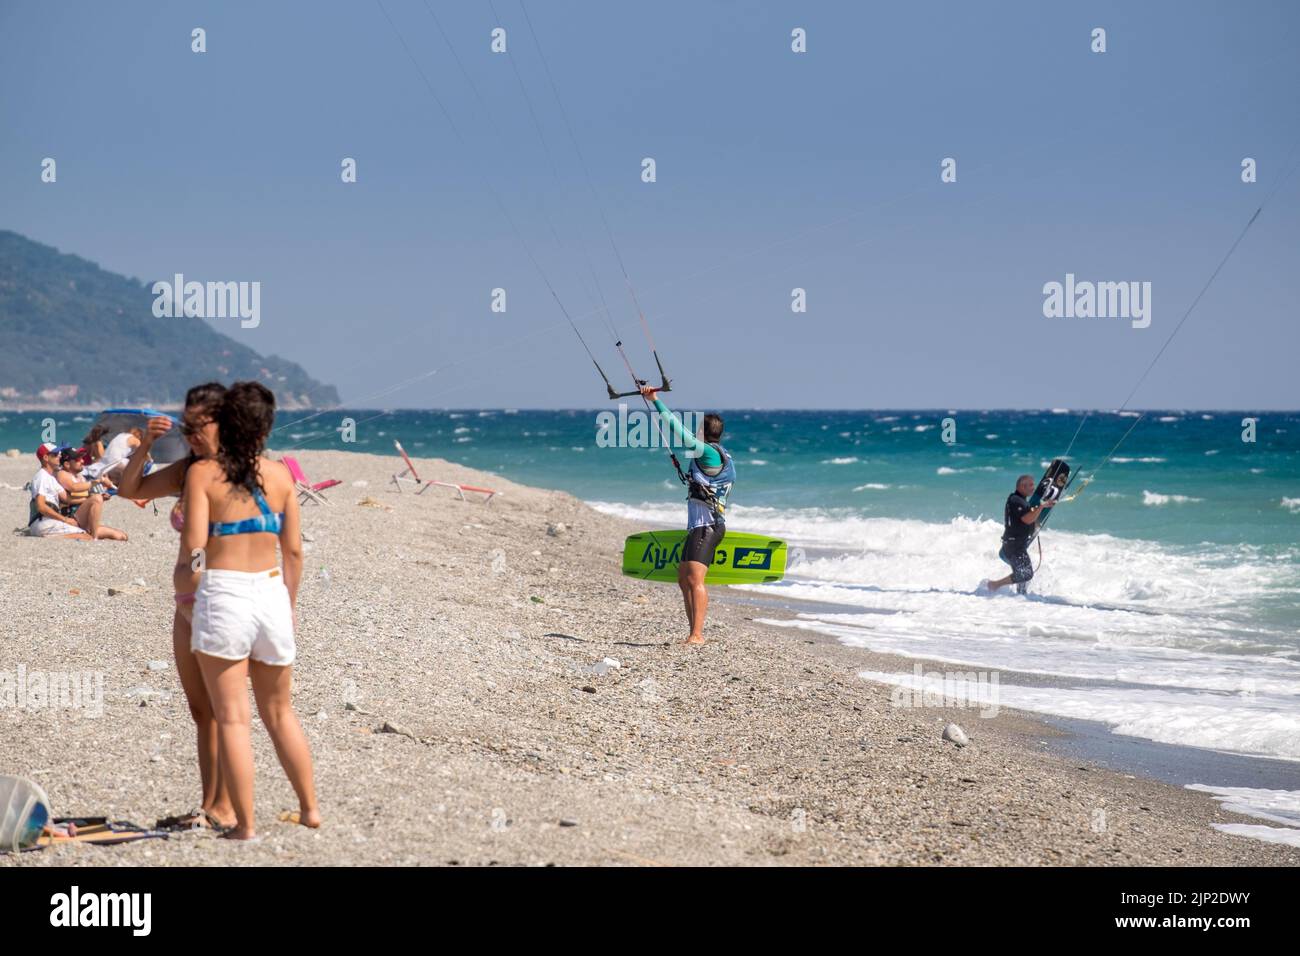 Kitesurfer holding the kite from the control bar Stock Photo